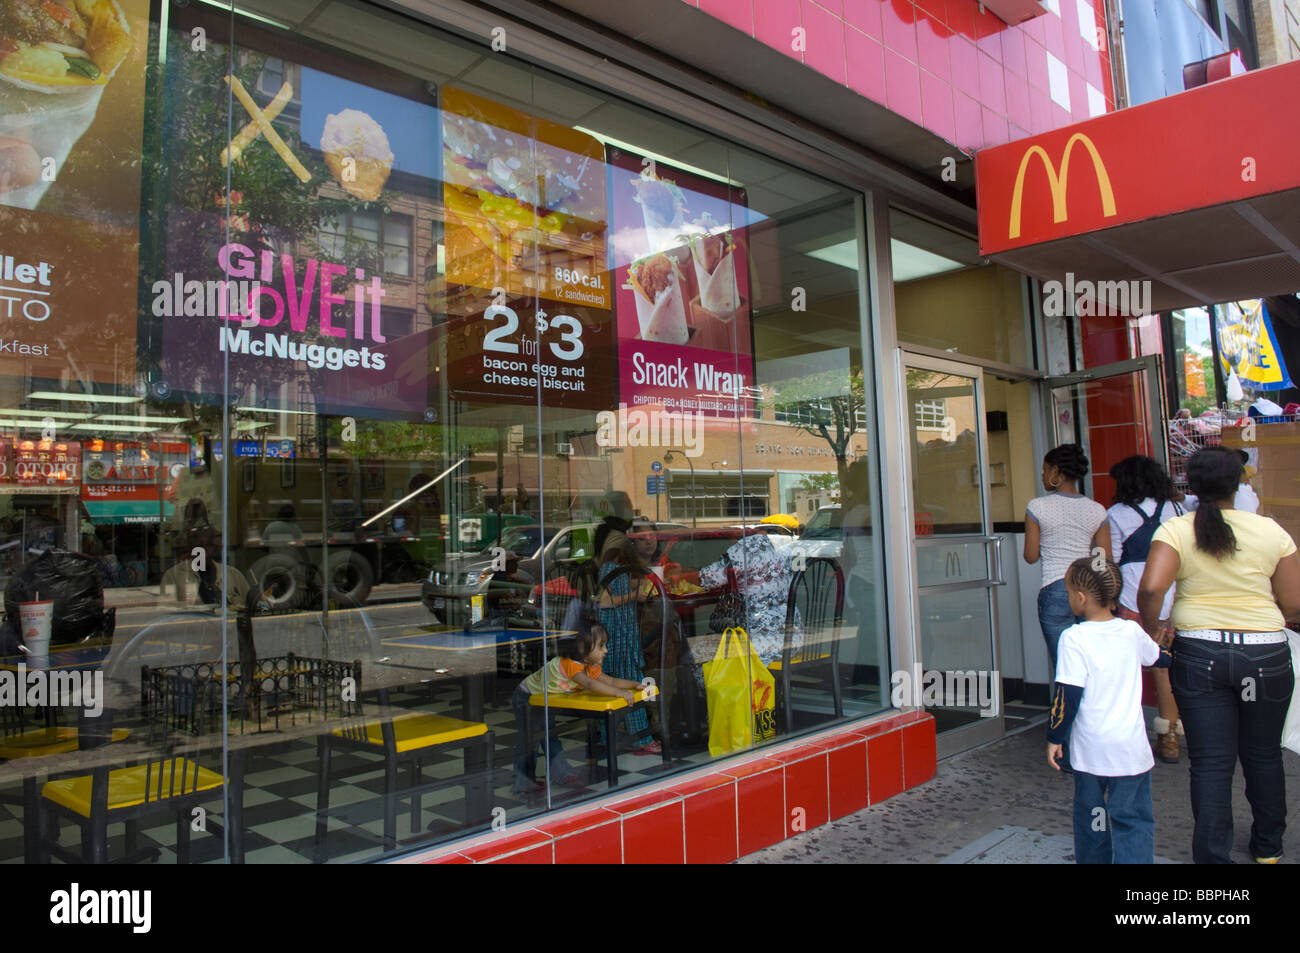 McDonald s restaurant in Harlem in New York on Saturday May 30 2009 Frances M Roberts Stock Photo